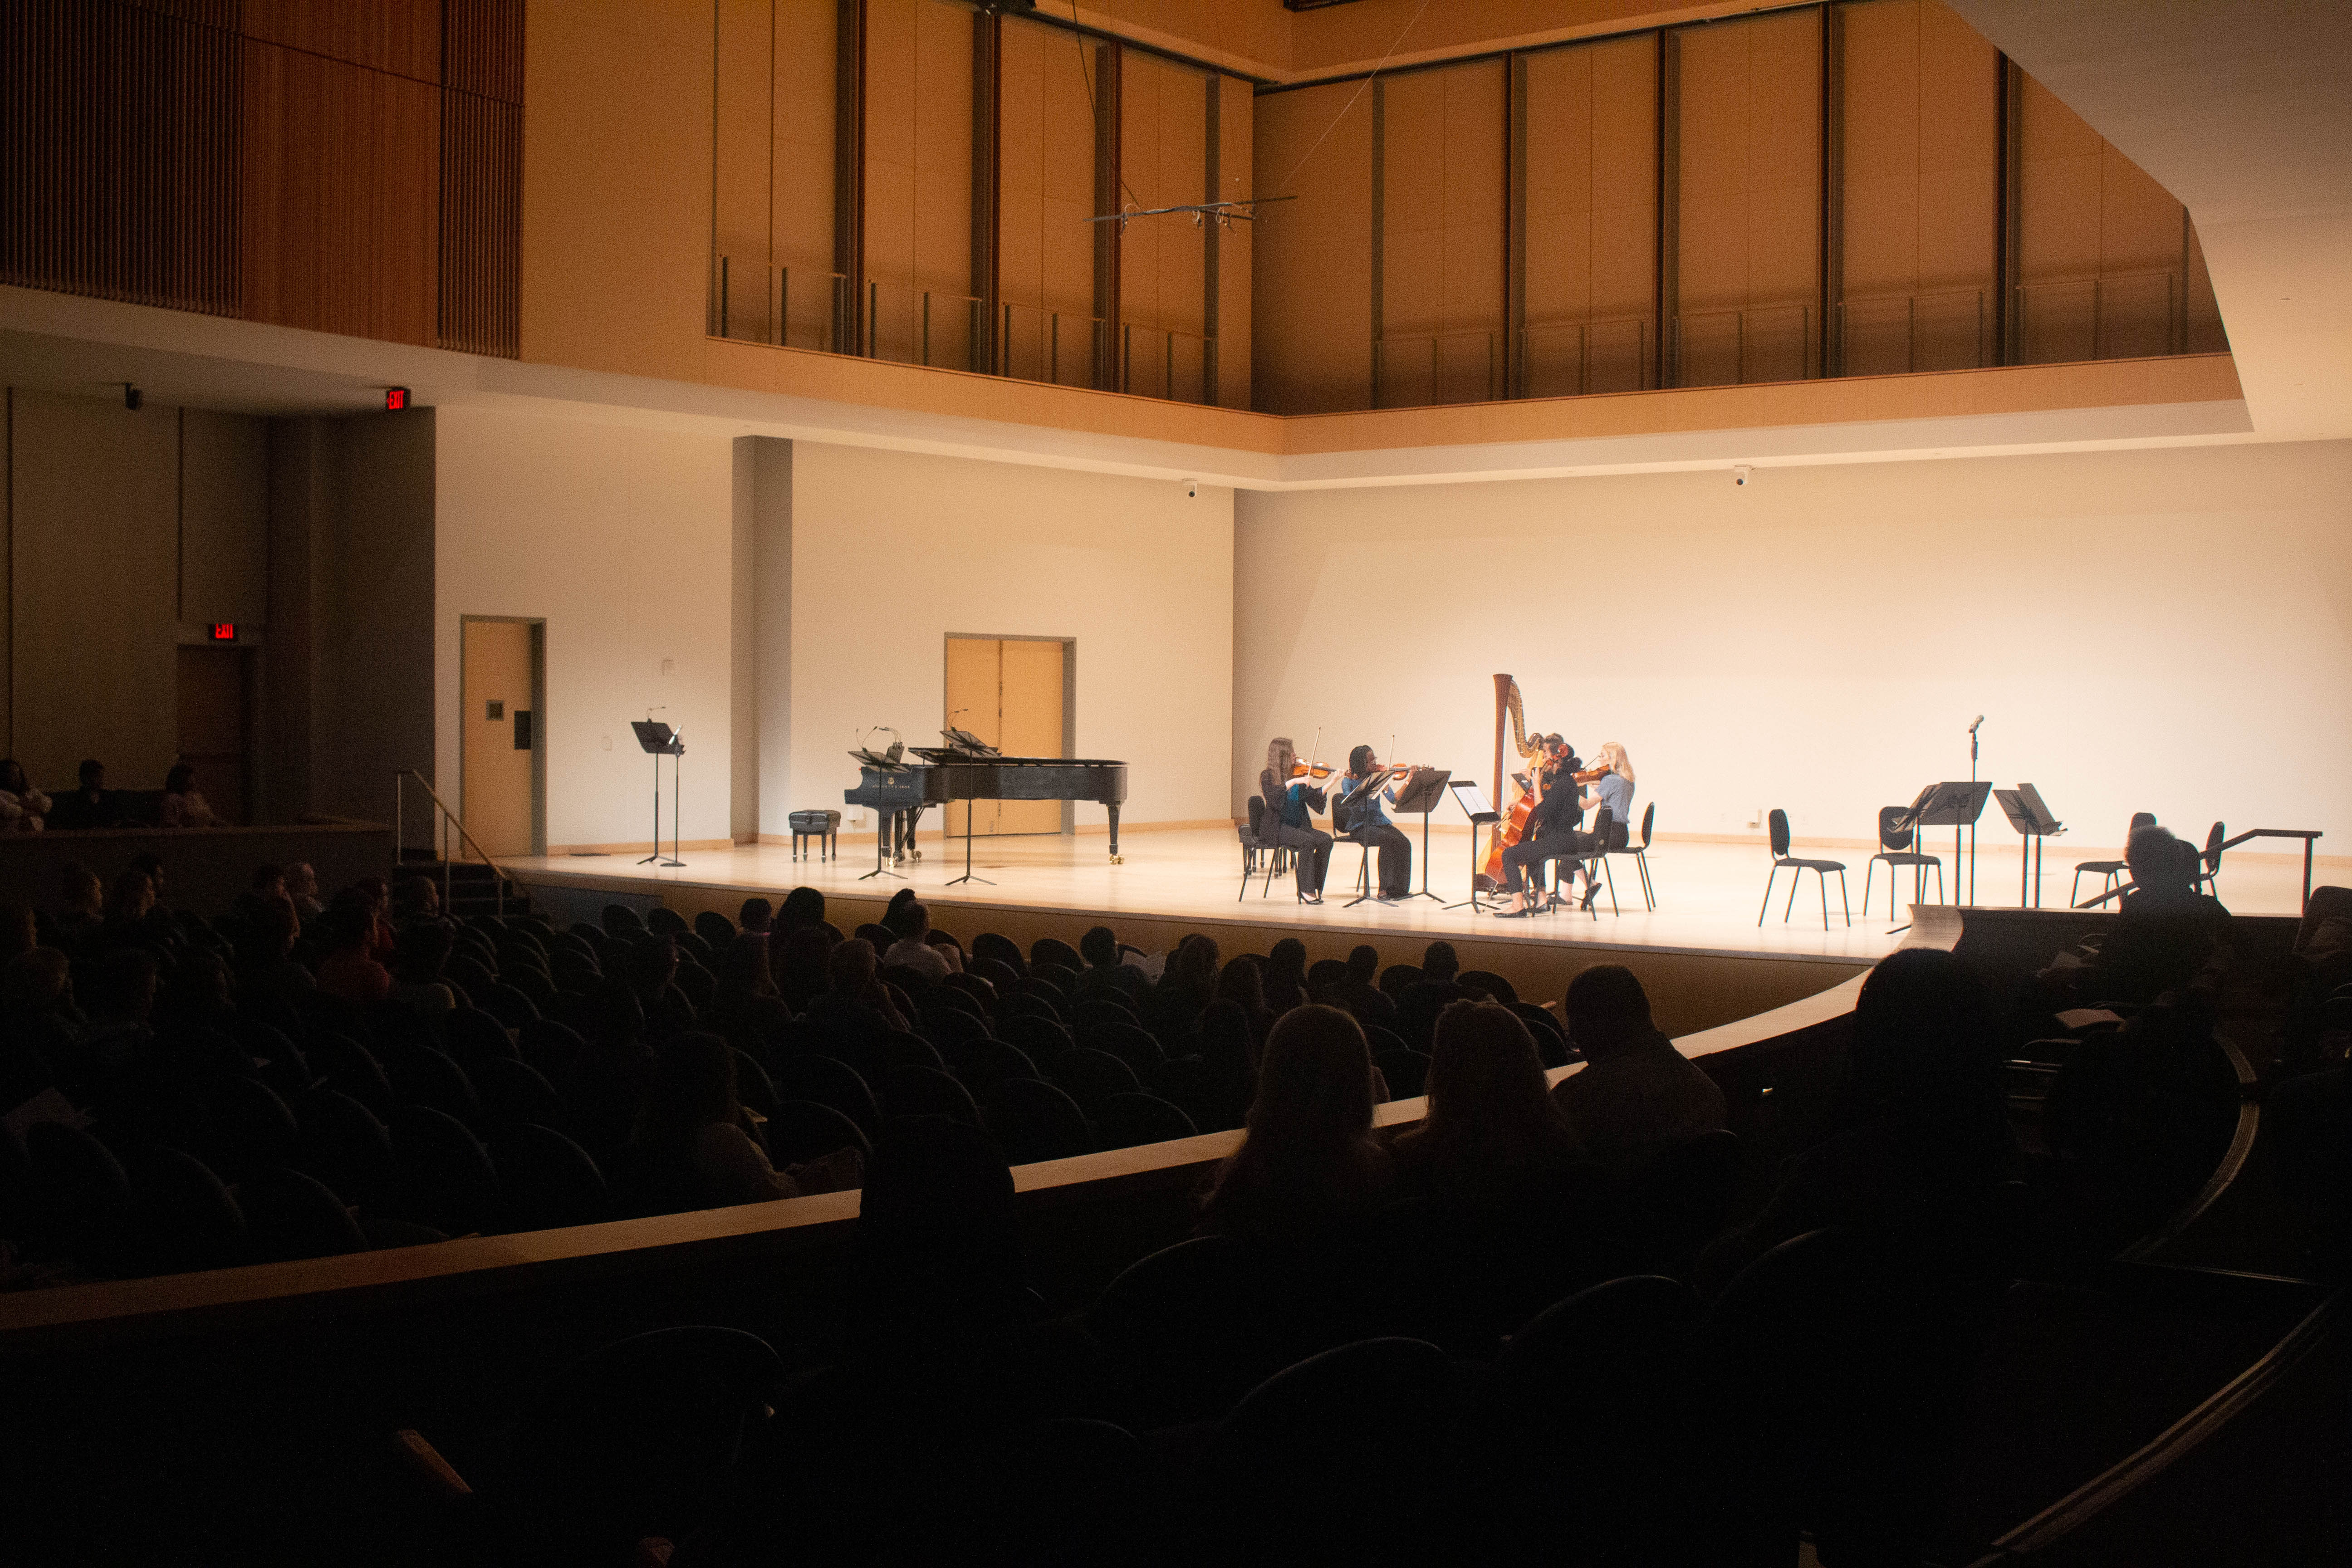 Student composers premiere music at Composition Recital